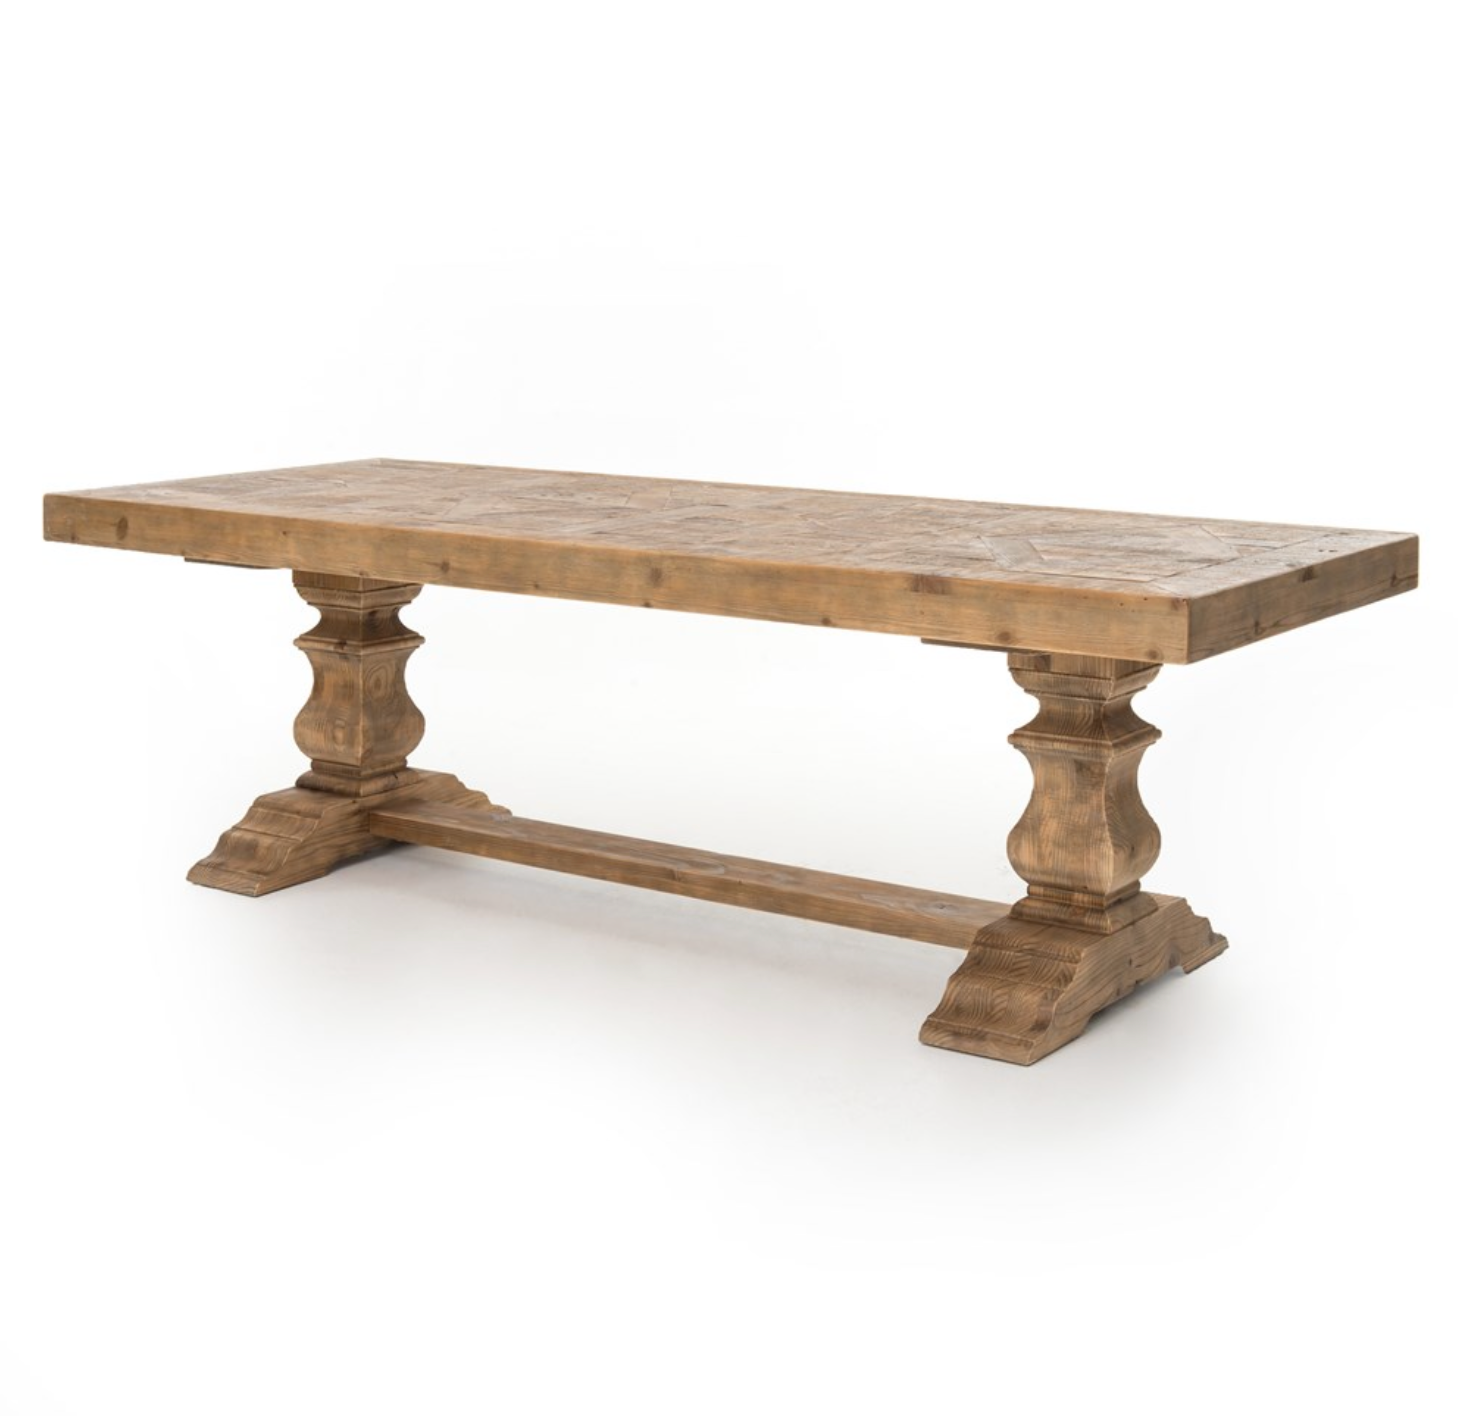 Castle 98" Dining Table - Waxed Bleached Pin